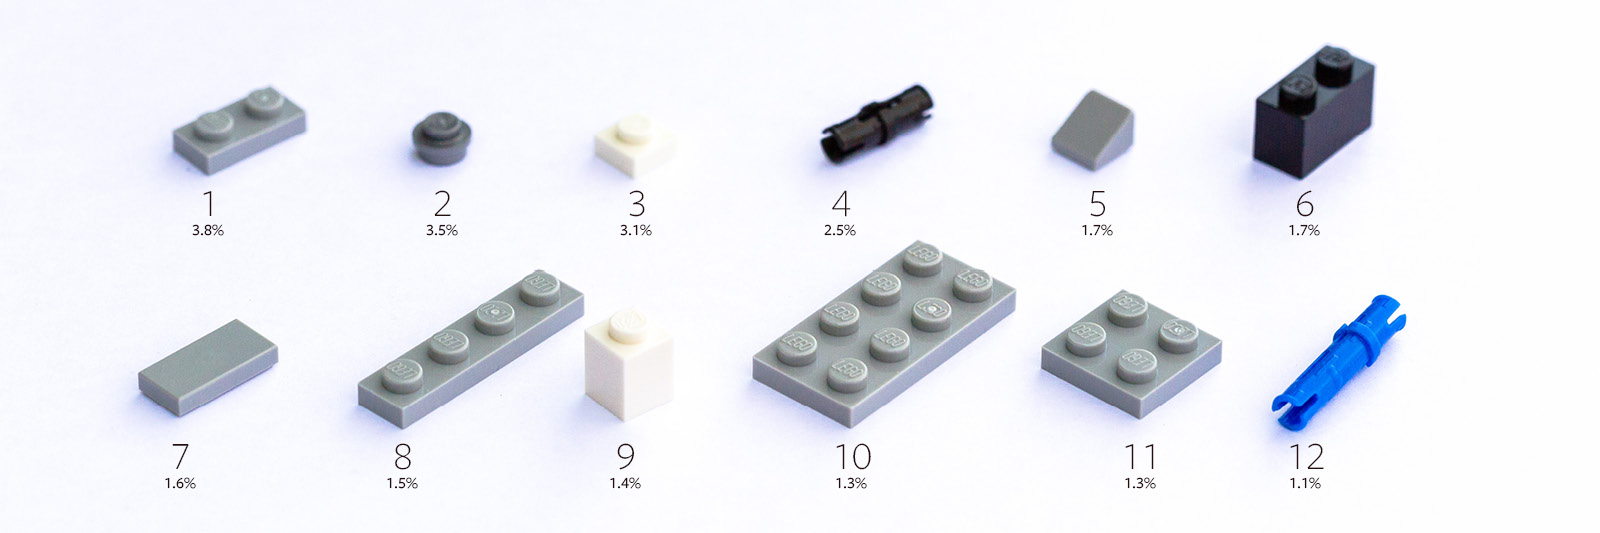 Qty 12 87580 - Pick Your Color Lego 2x2 Plate with One Top Stud 